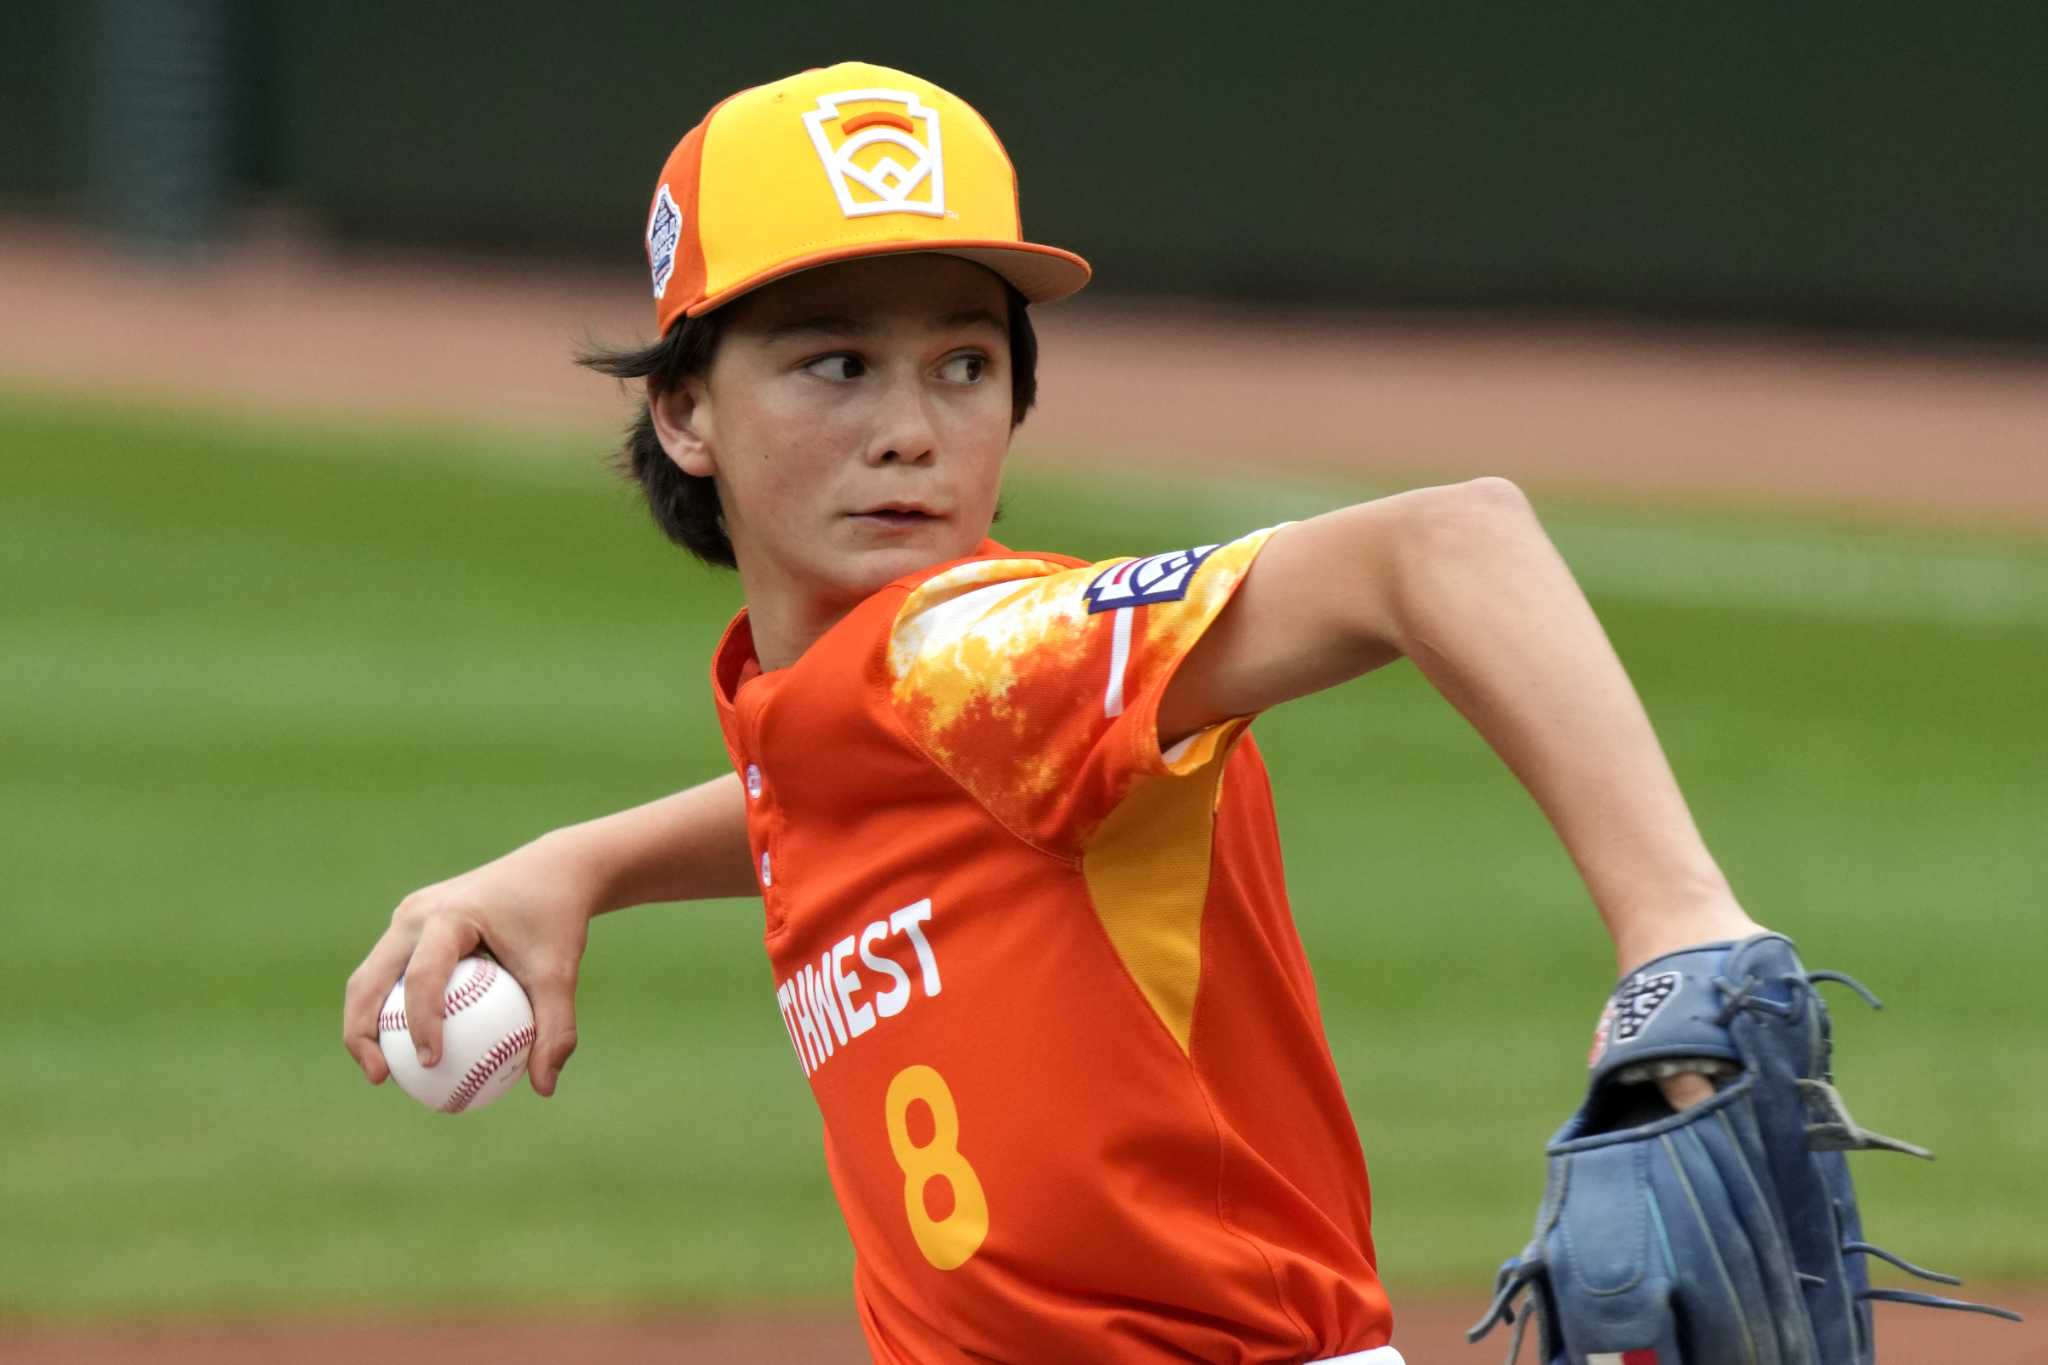 Little league teams have pulled out of a state championship after